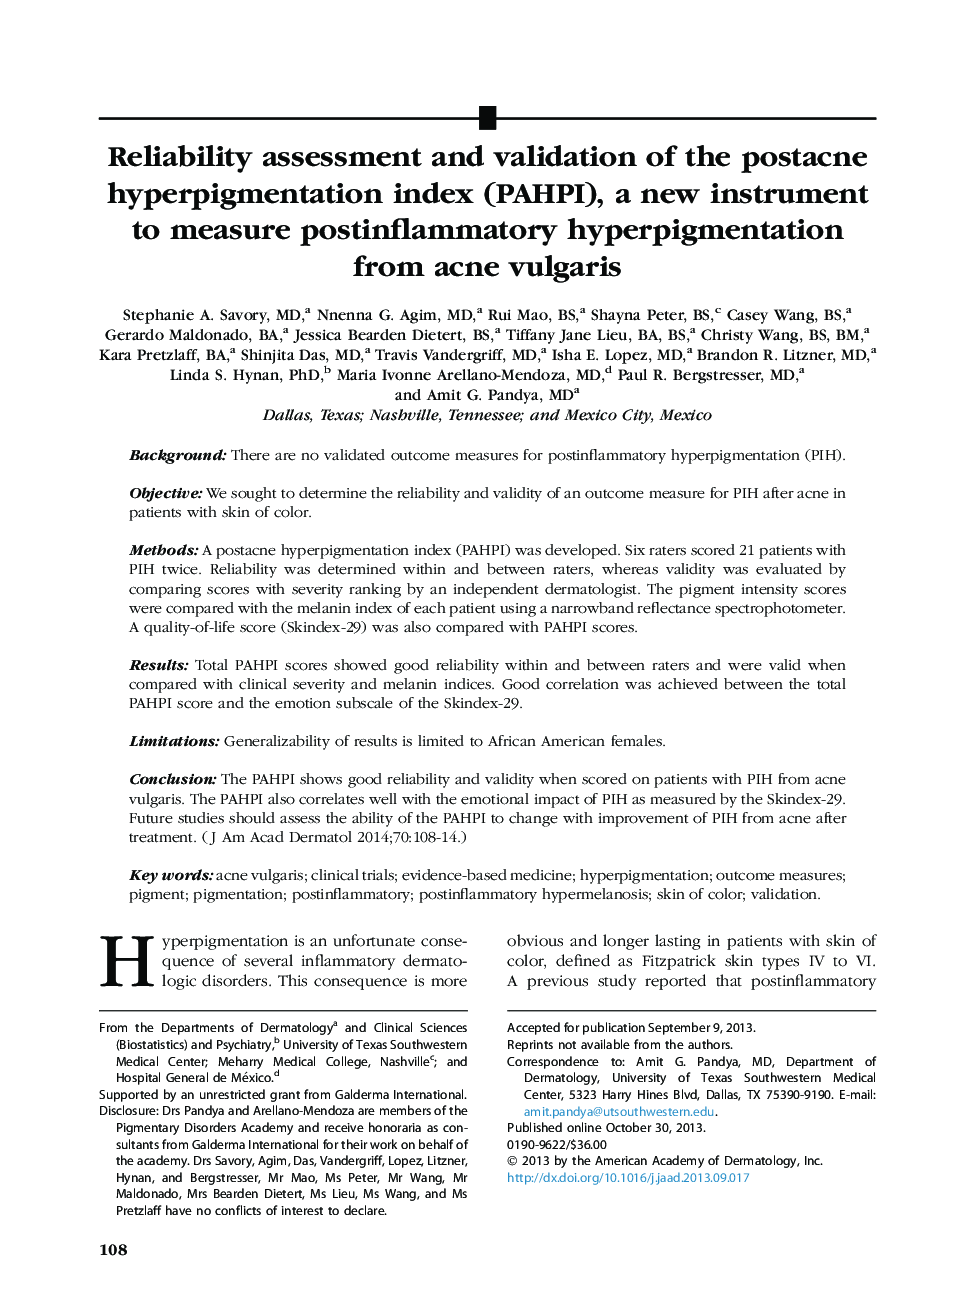 Reliability assessment and validation of the postacne hyperpigmentation index (PAHPI), a new instrument to measure postinflammatory hyperpigmentation from acne vulgaris